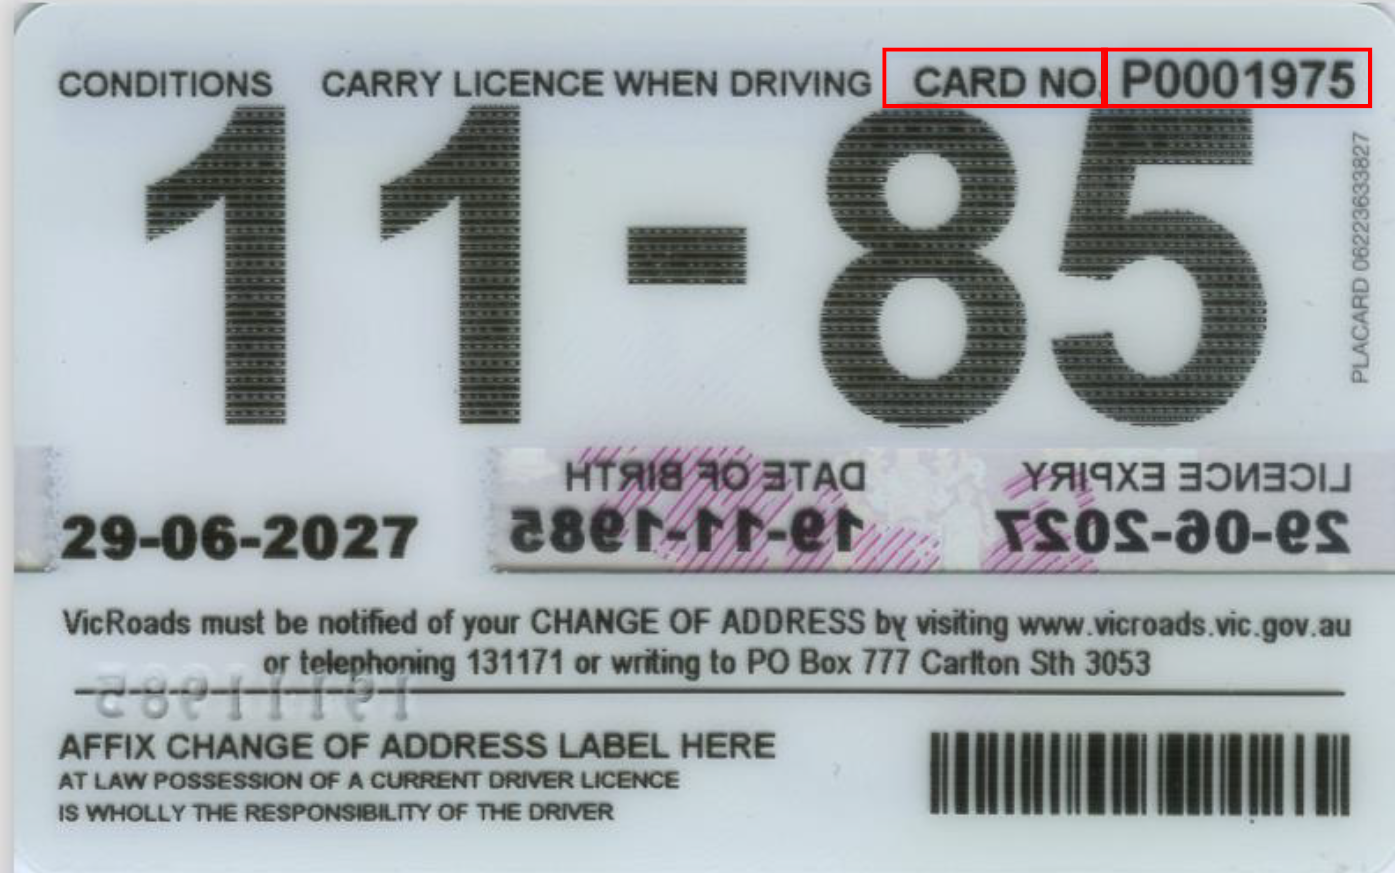 Image shows the back of a Victorian Driver Licence with a red box highlighting the Card Number field in the top right corner of the card.